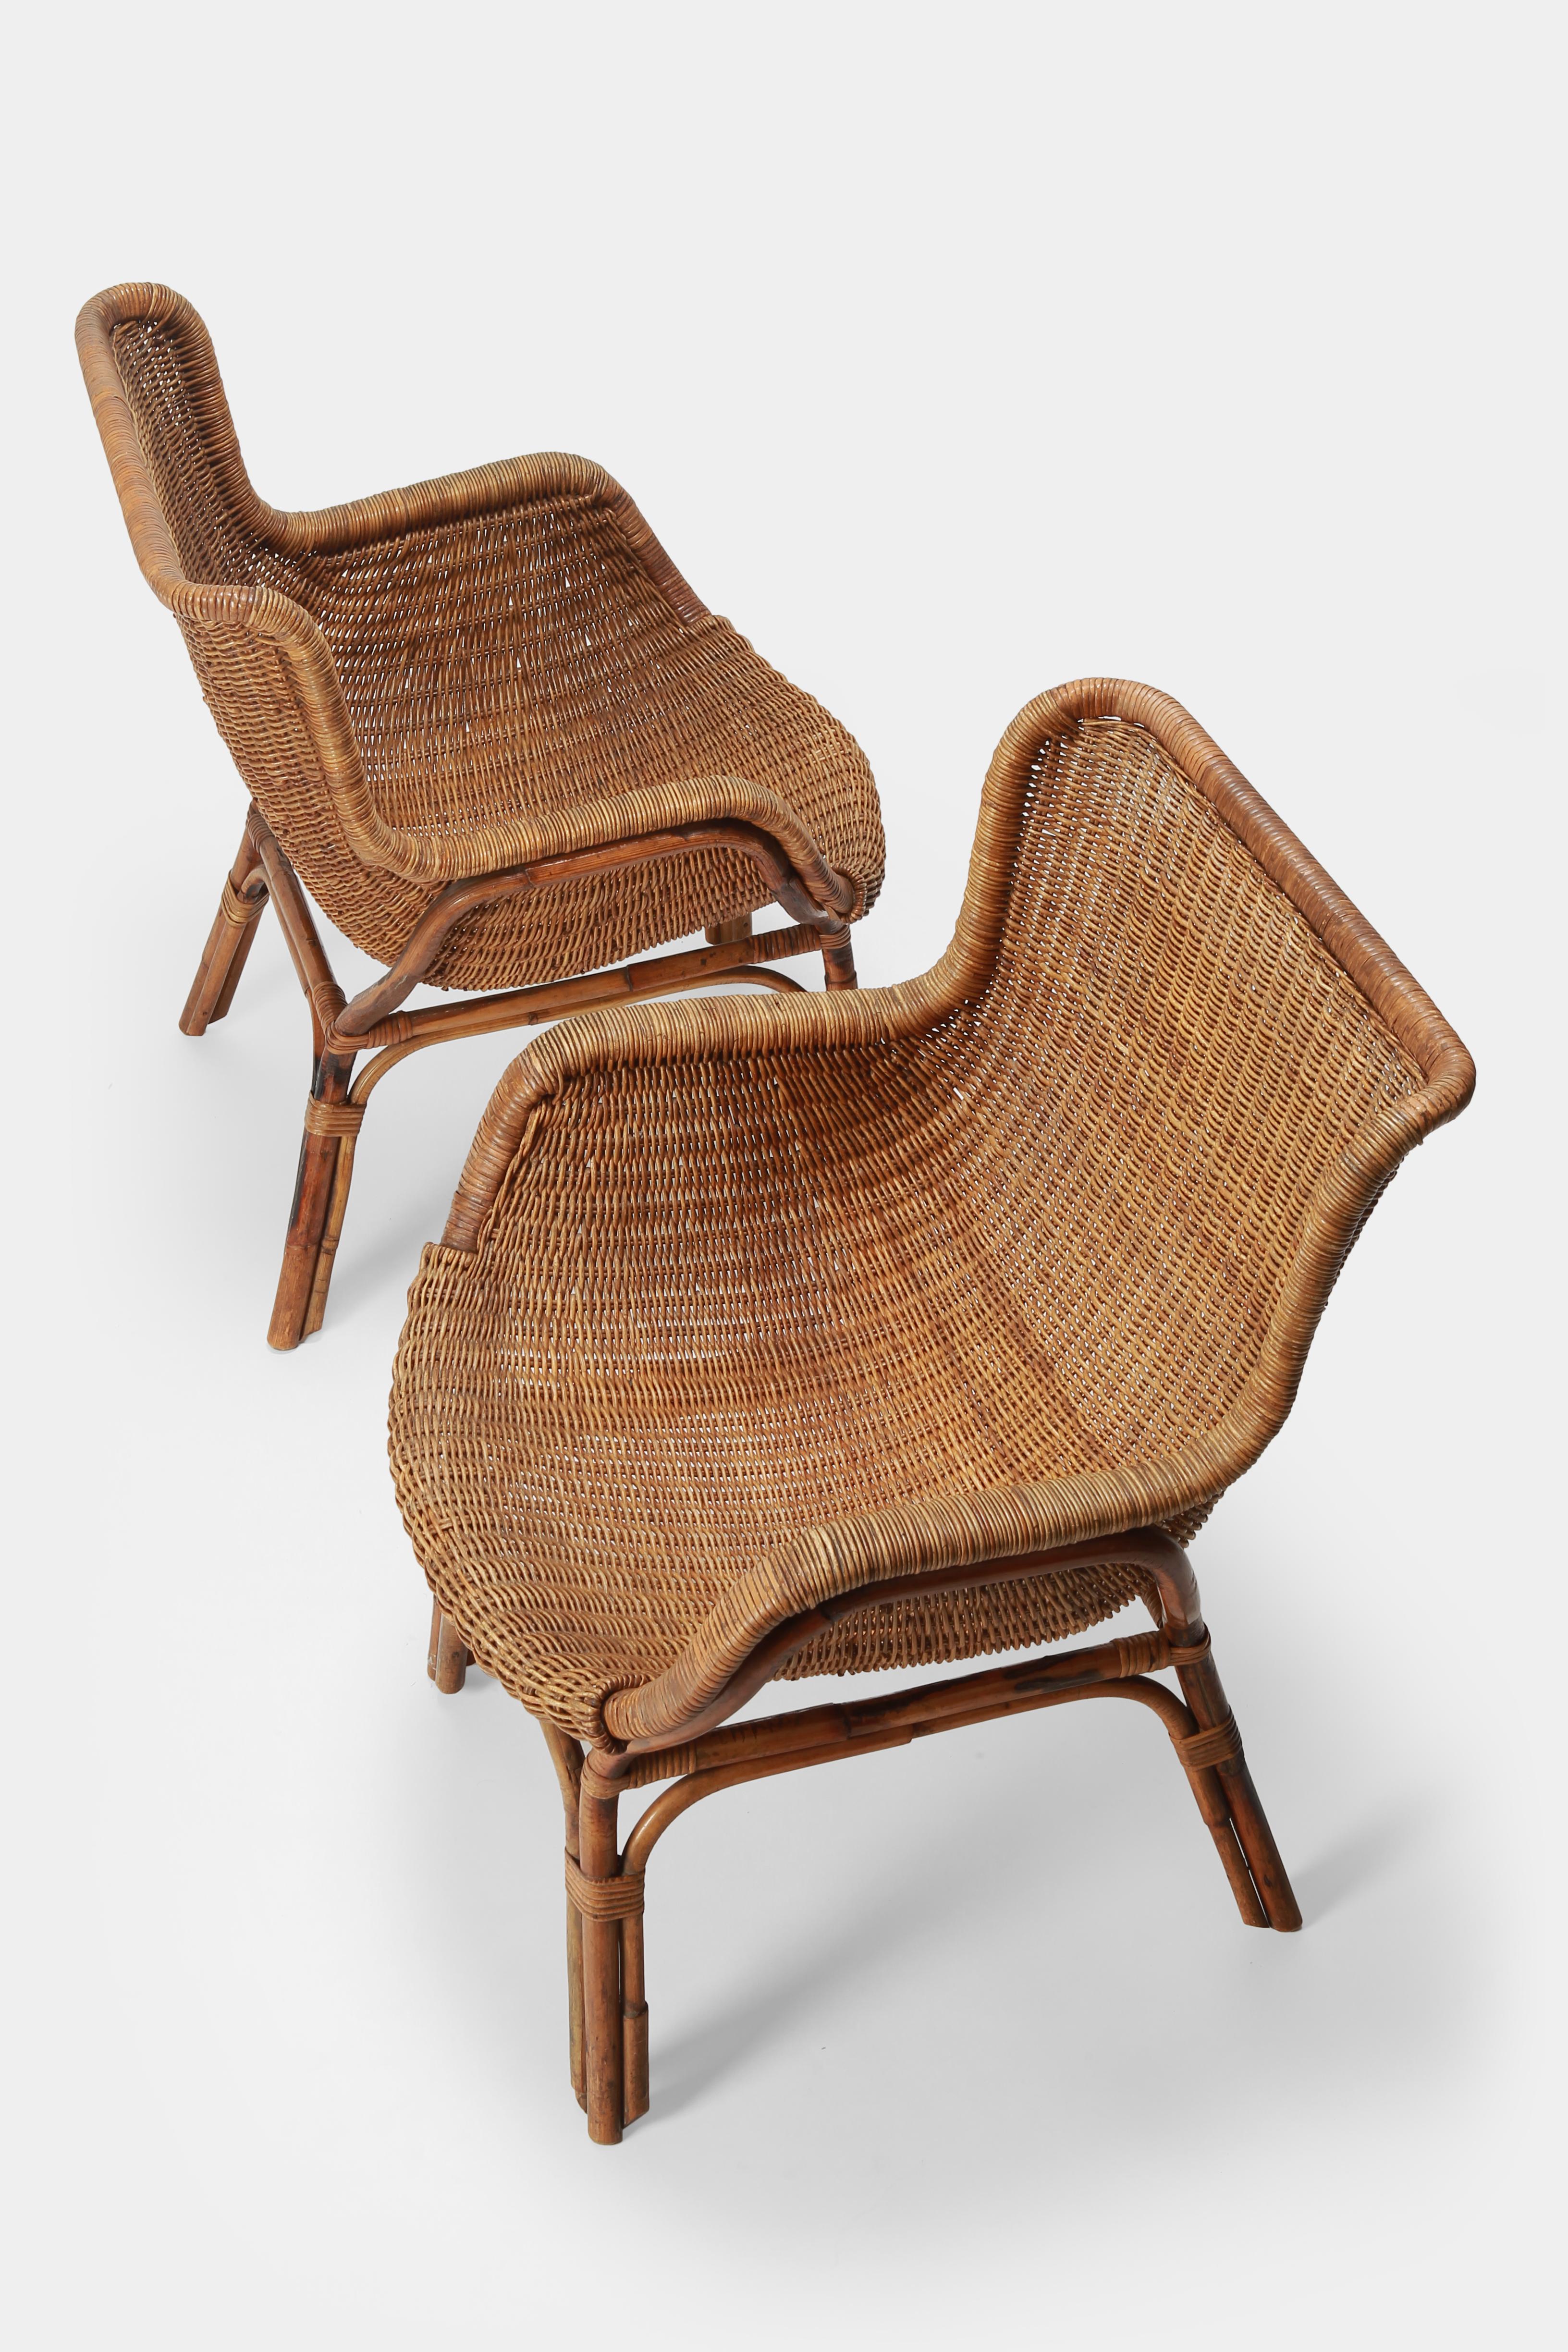 Two bamboo armchairs made by Bonacino in Italy in the 1950s. Very beautiful shape and first class craftsmanship. Gently restored and in good condition.